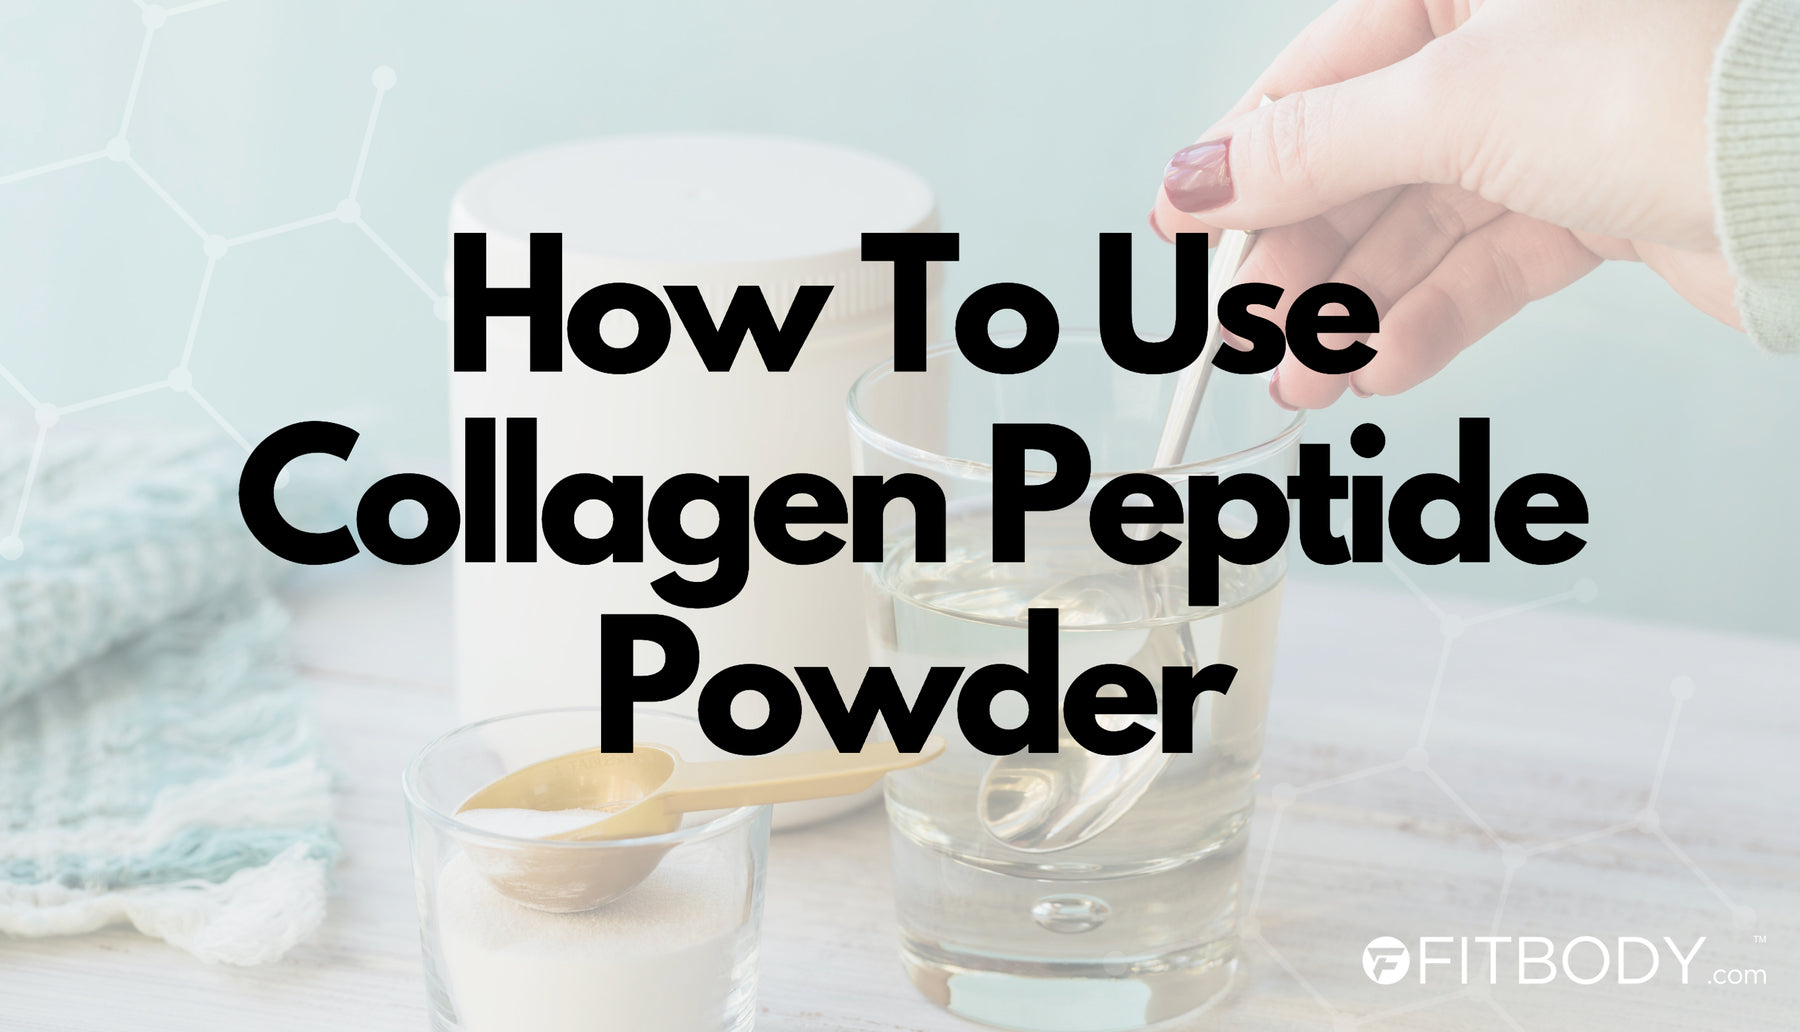 How to take collagen effectively